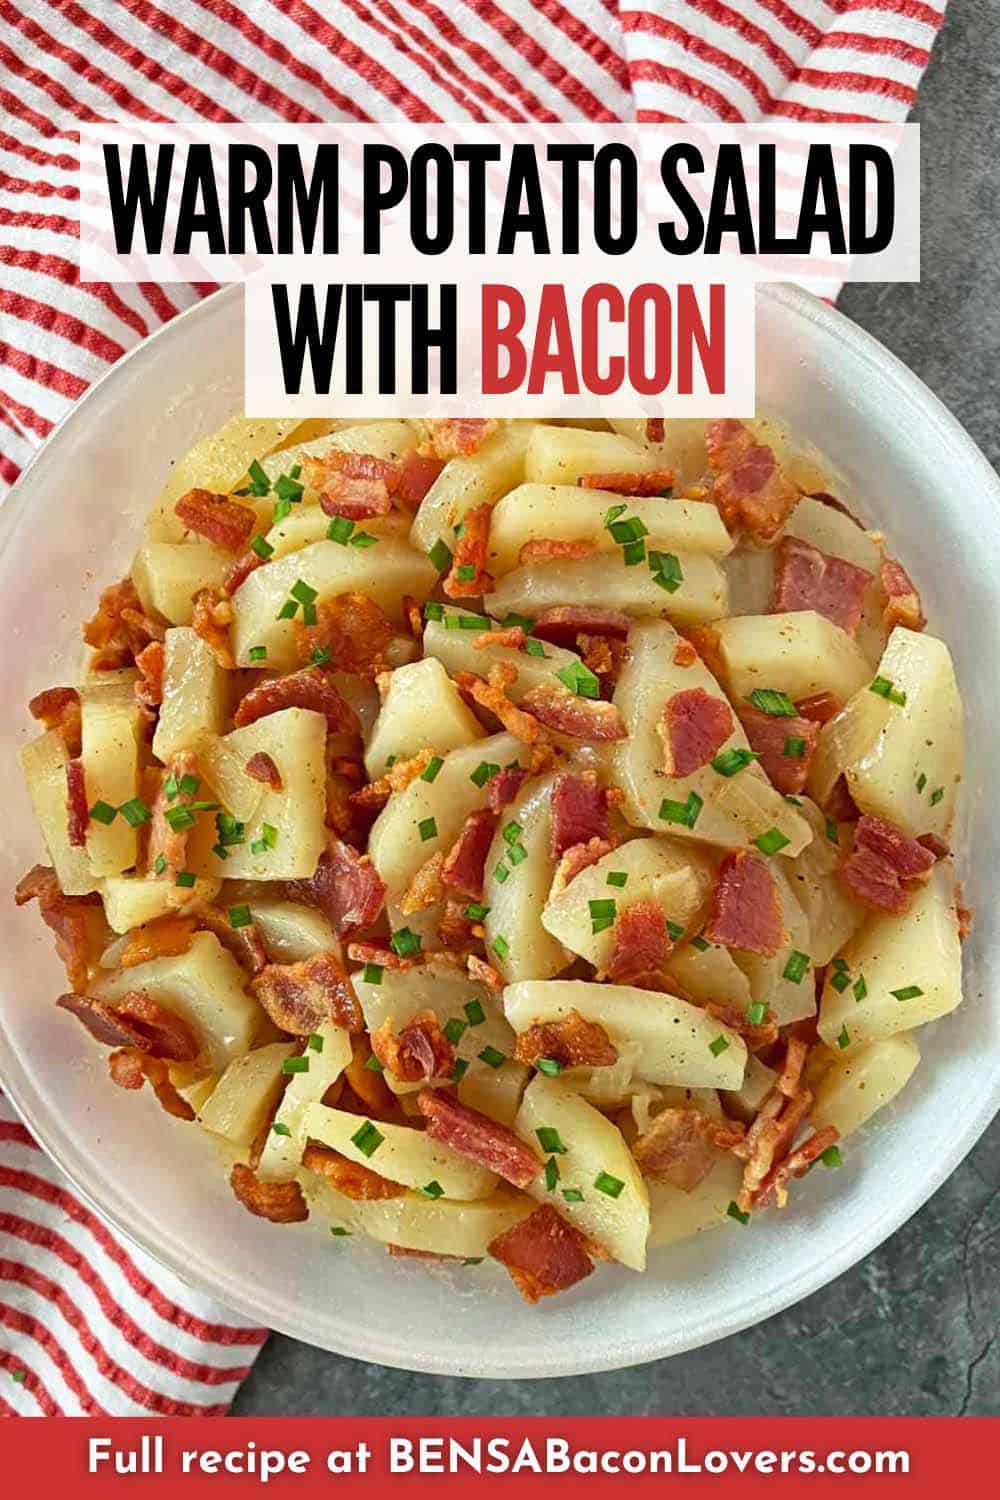 A serving bowl filled with warm bacon potato salad and garnished with chopped chives.